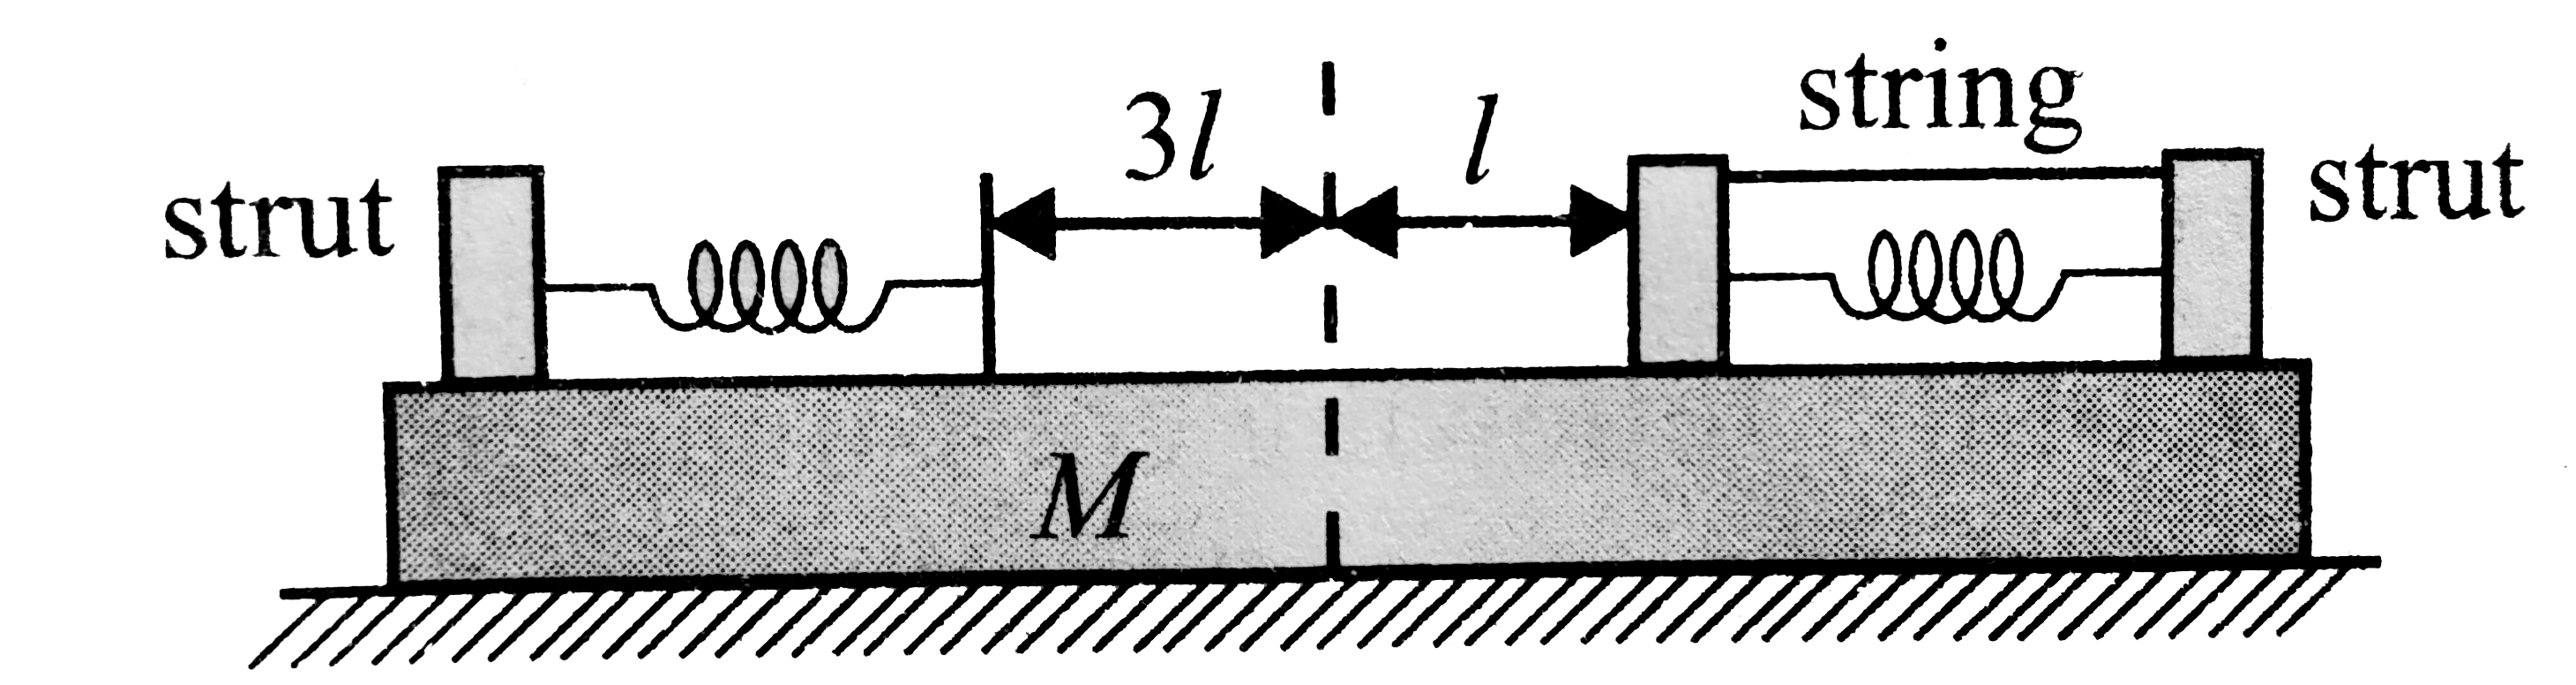 According to the principle of conservation of linear momentum if the external force acting on the system is zero, the linear momentum of the system will remain conserved. It means if the centre of mass of a system is initially at rest, it will remain at rest in the absence of external force, that is, the displacement of centre of mass will be zero.   A plank of mass M is placed on a smooth horizontal surface.  light identical springs, each of stiffness K, are rigidly connected to struts at the end of the plank as shown in Fig. When the springs are in their unextended position, the distance between their free ends is 3l. A block of mass m is placed on the plank and pressed against one of the springs so that it is compressed to l.  To keep the block at rest it is connected to the strut means of a light string. Initially, the system is at rest, Now the string is burnt.      The maximum kinetic energy of the block m is